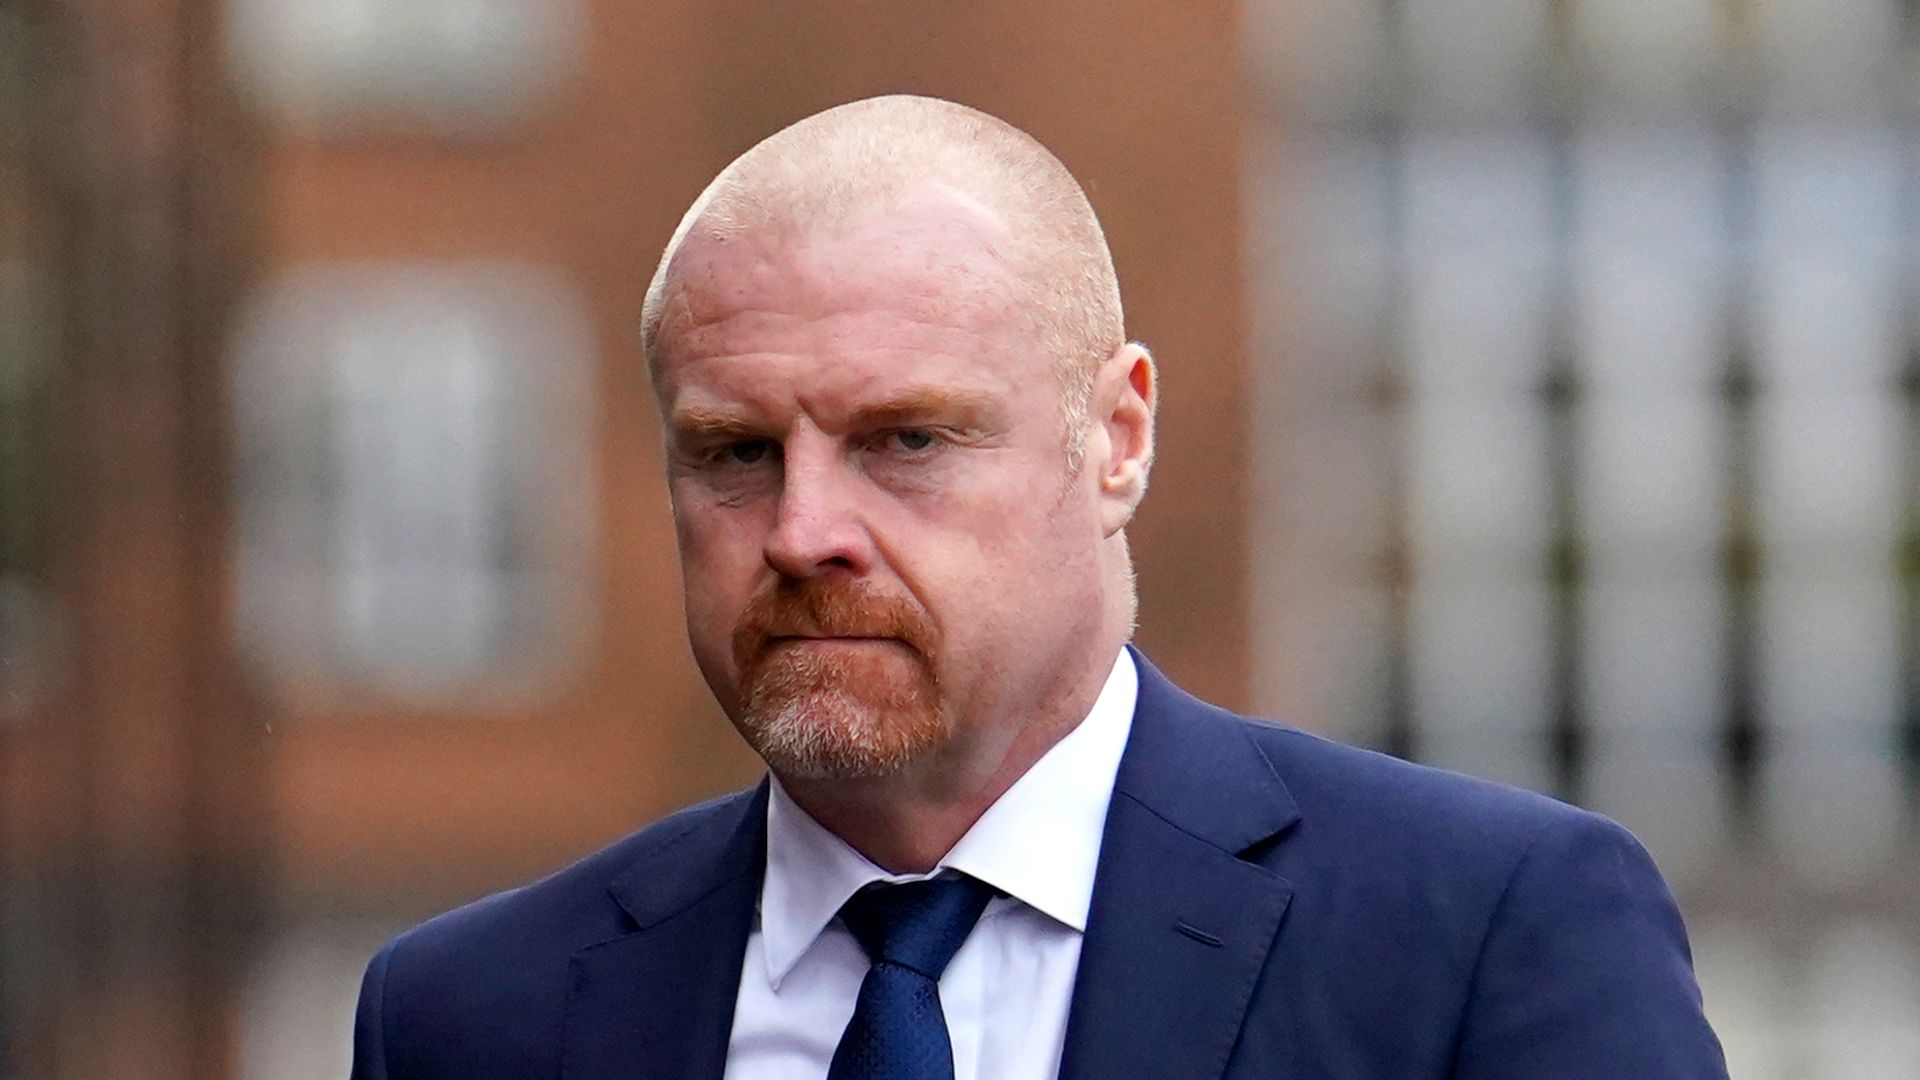 Dyche and Dalglish among those to attend Kenwright's funeral